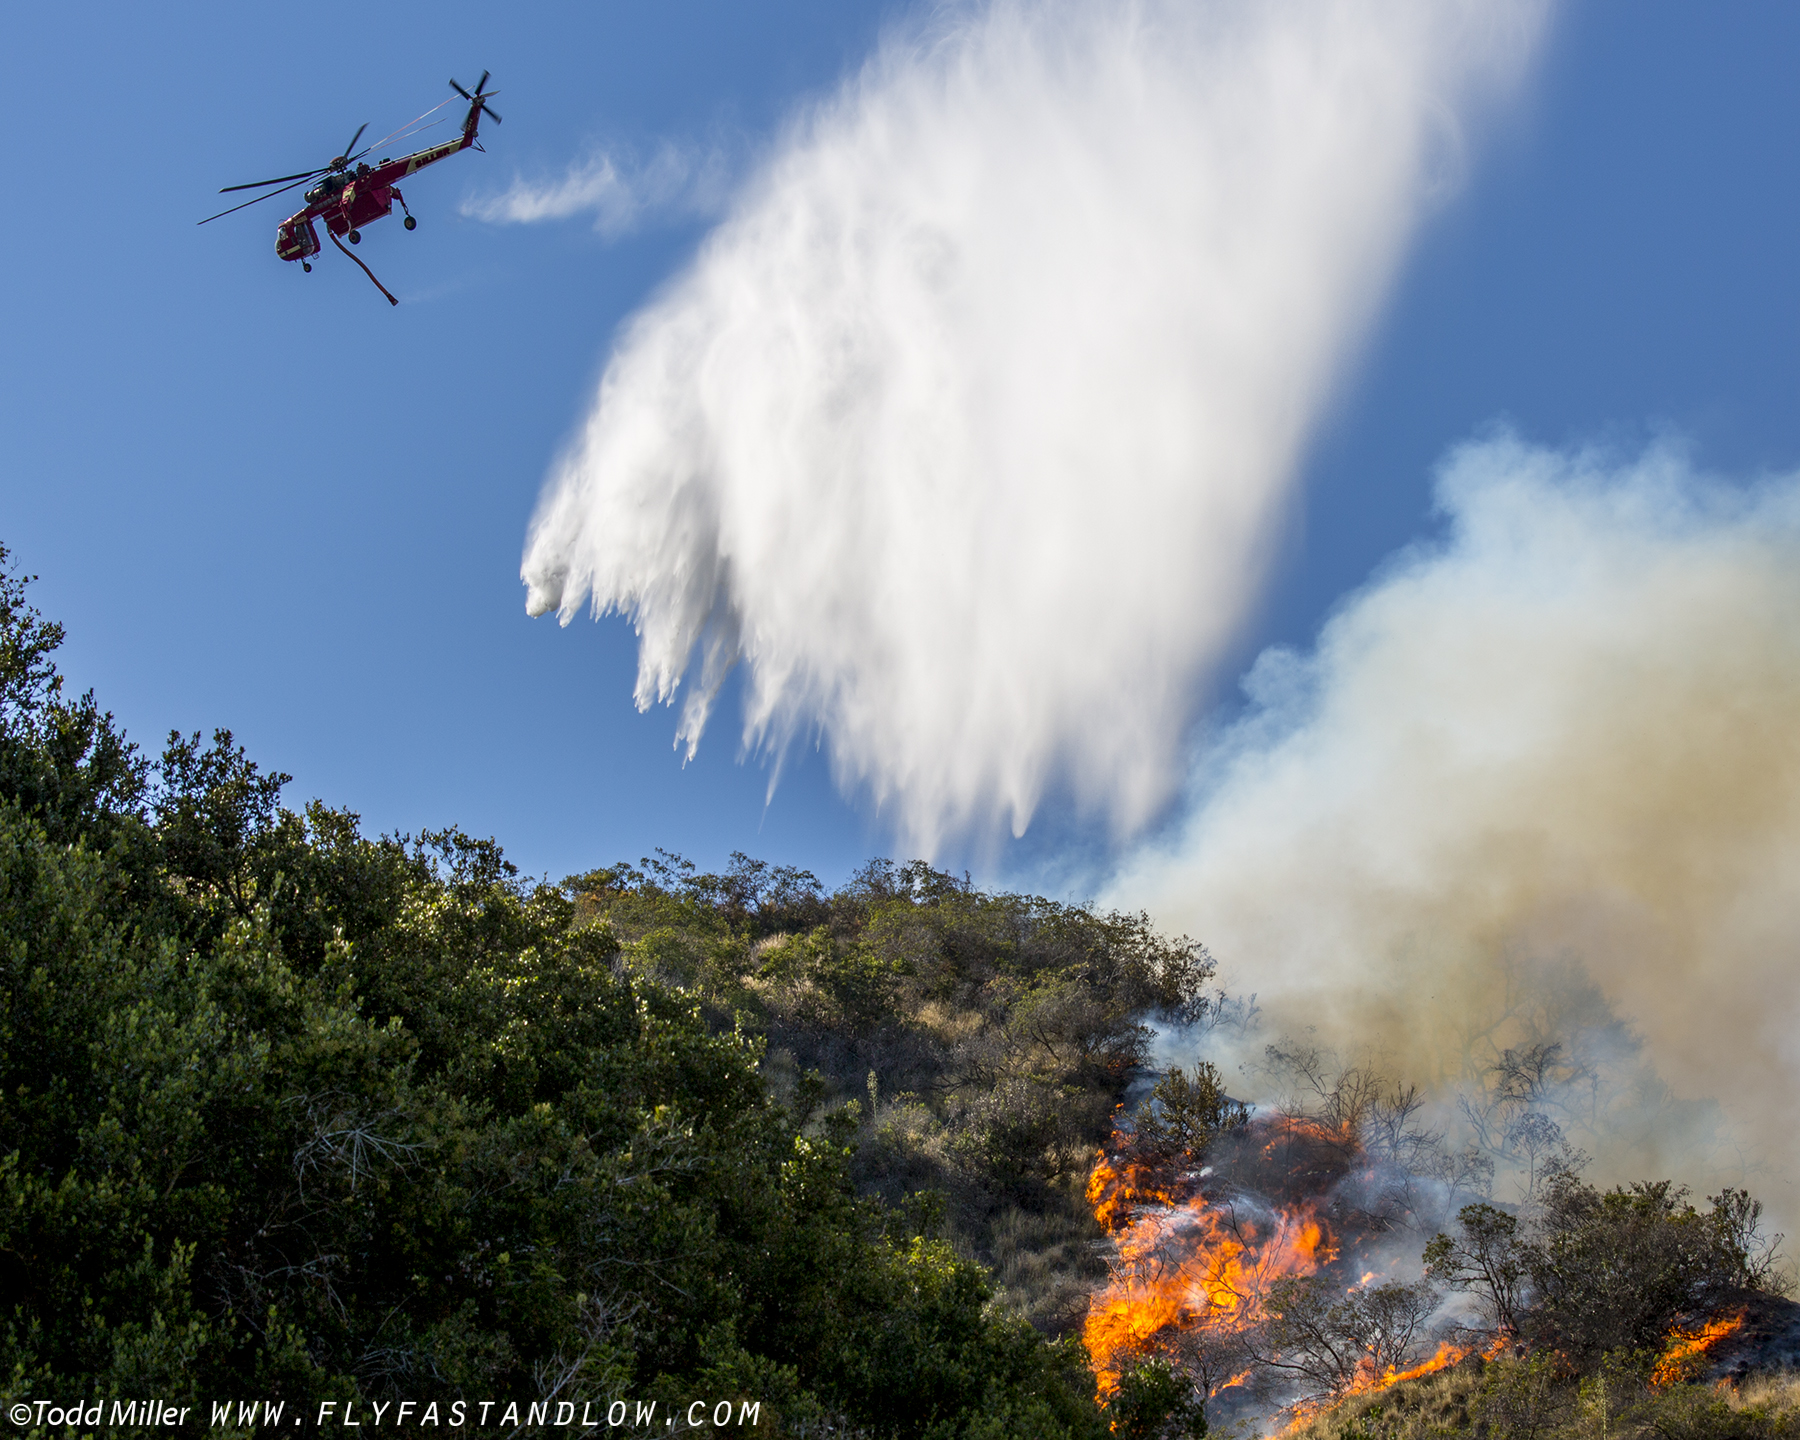 Sikorsky CH-54B makes water drop on the Asuza Fire in CA, June 20, 2016.